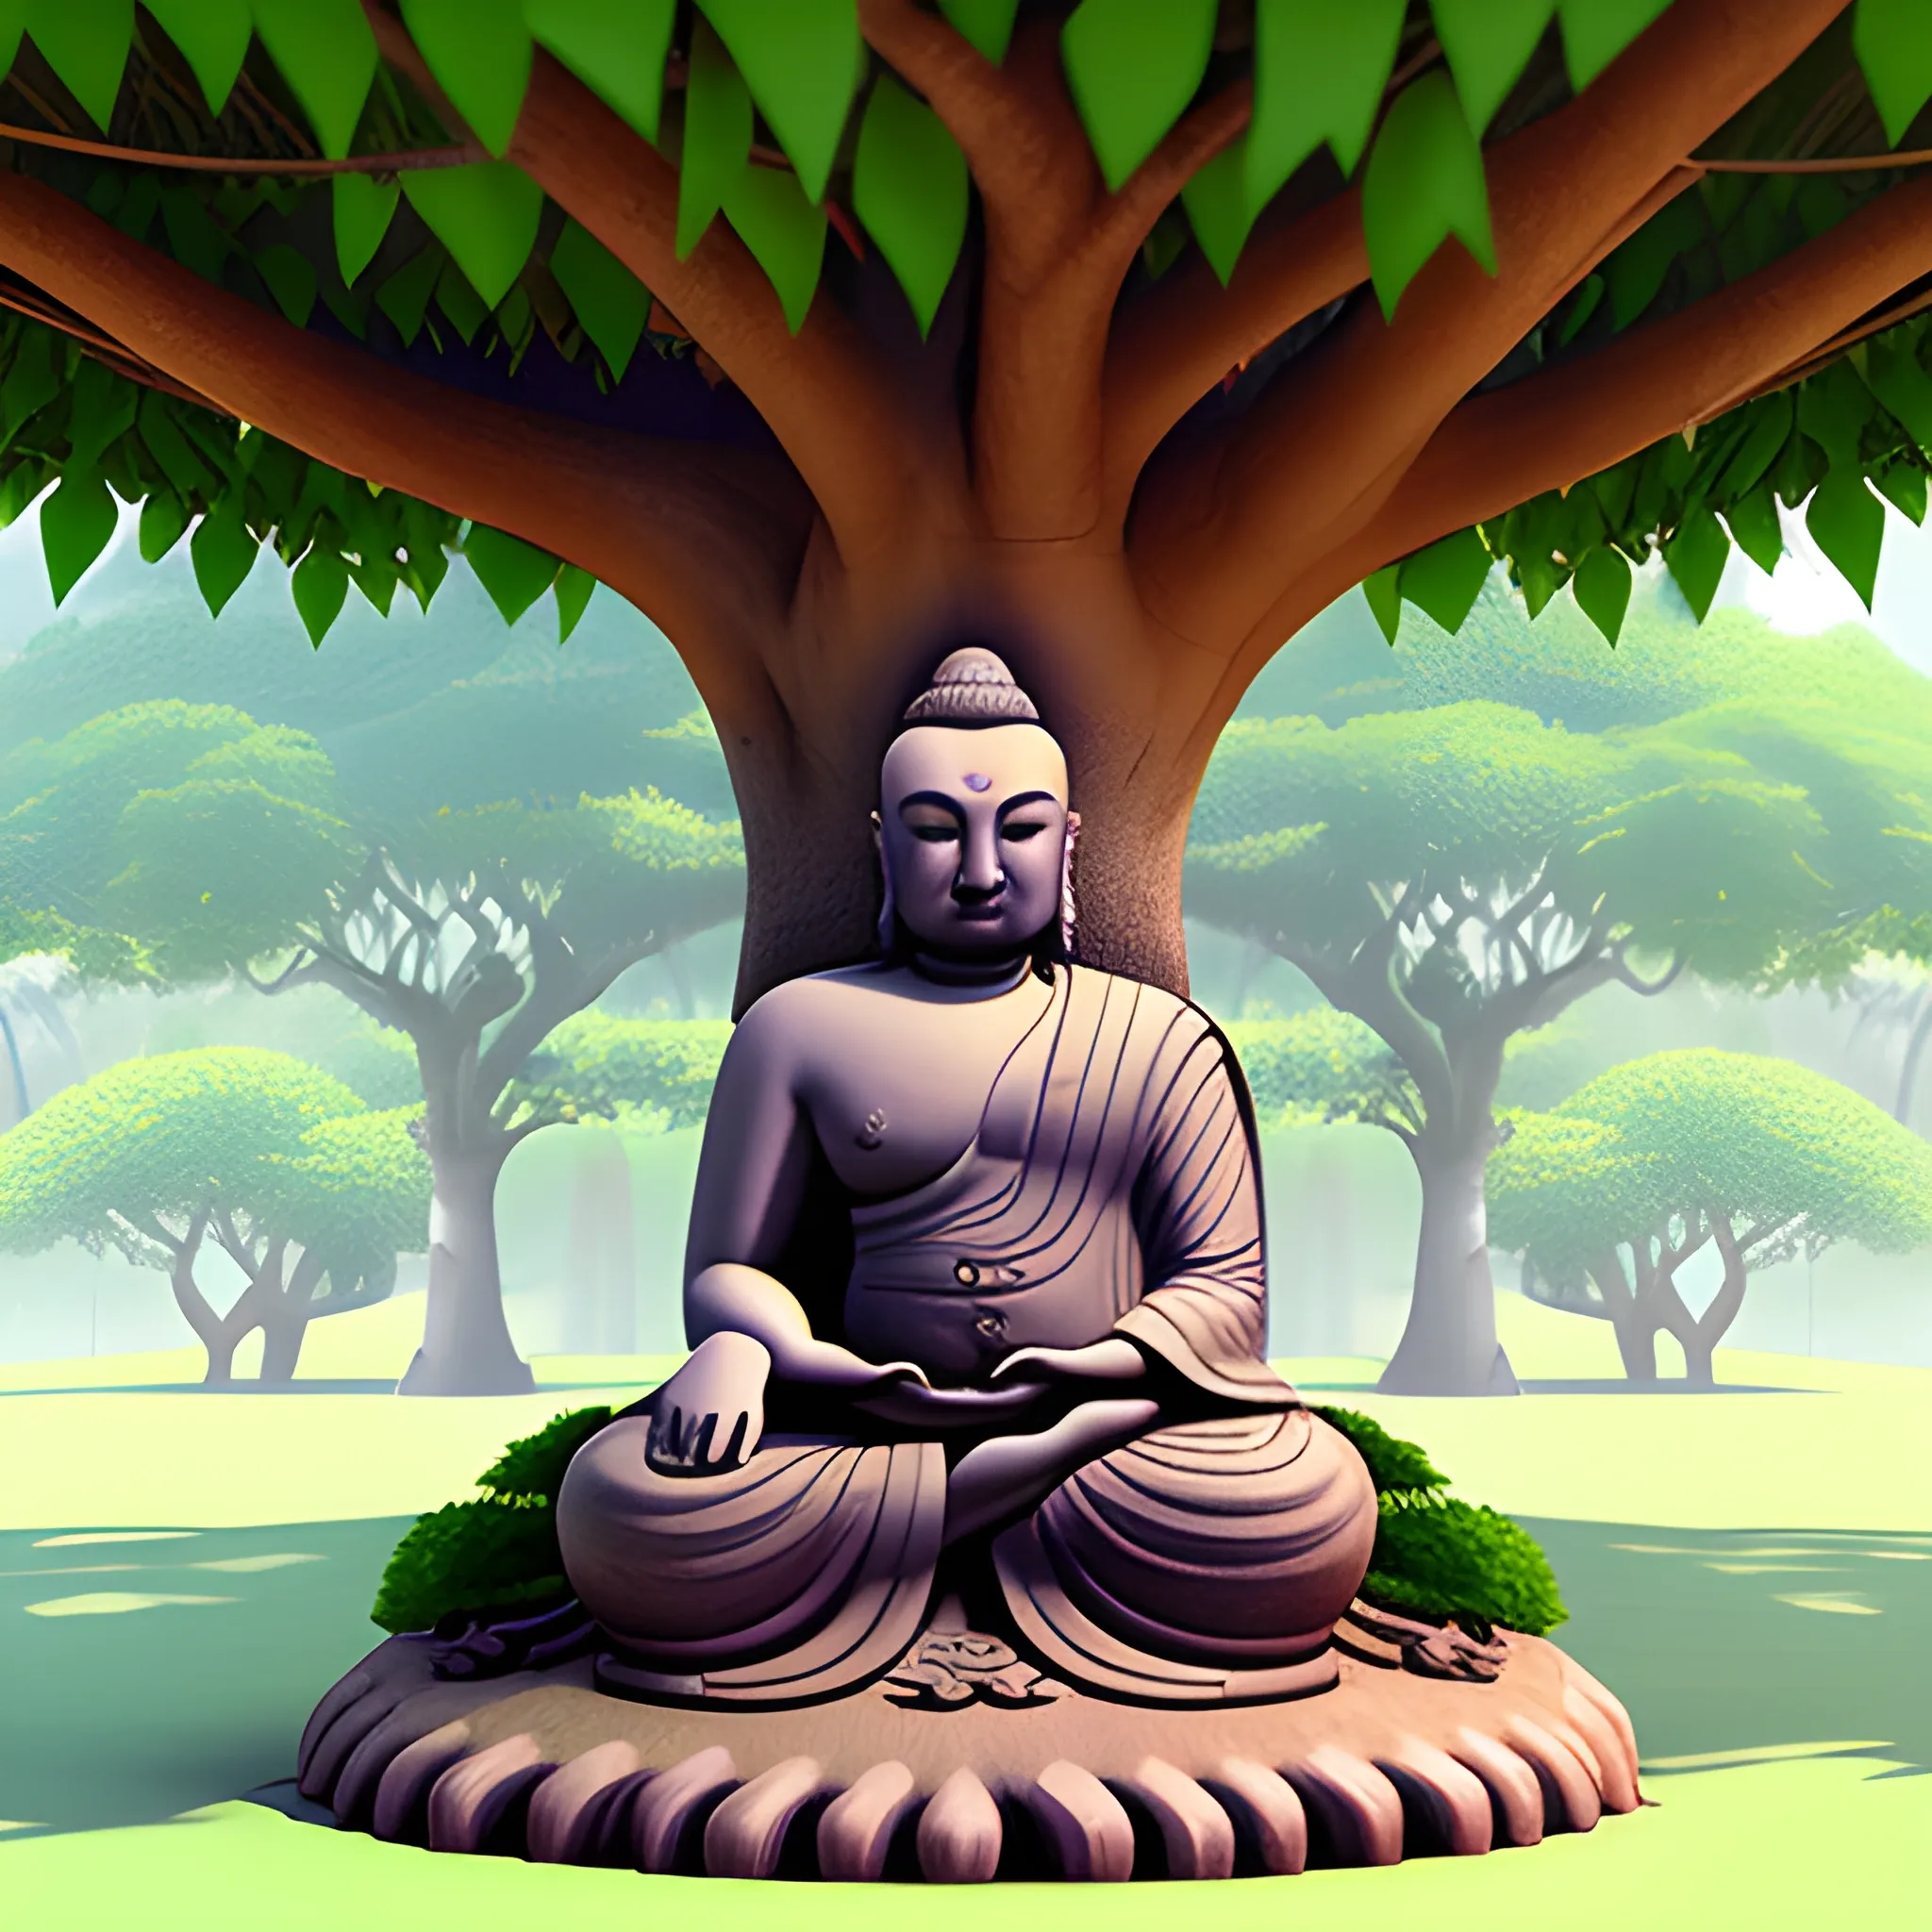 Create a realistic 3D illustration of an animated lord Budha character sitting casually under a Banyan Tree with their students., Pencil Sketch